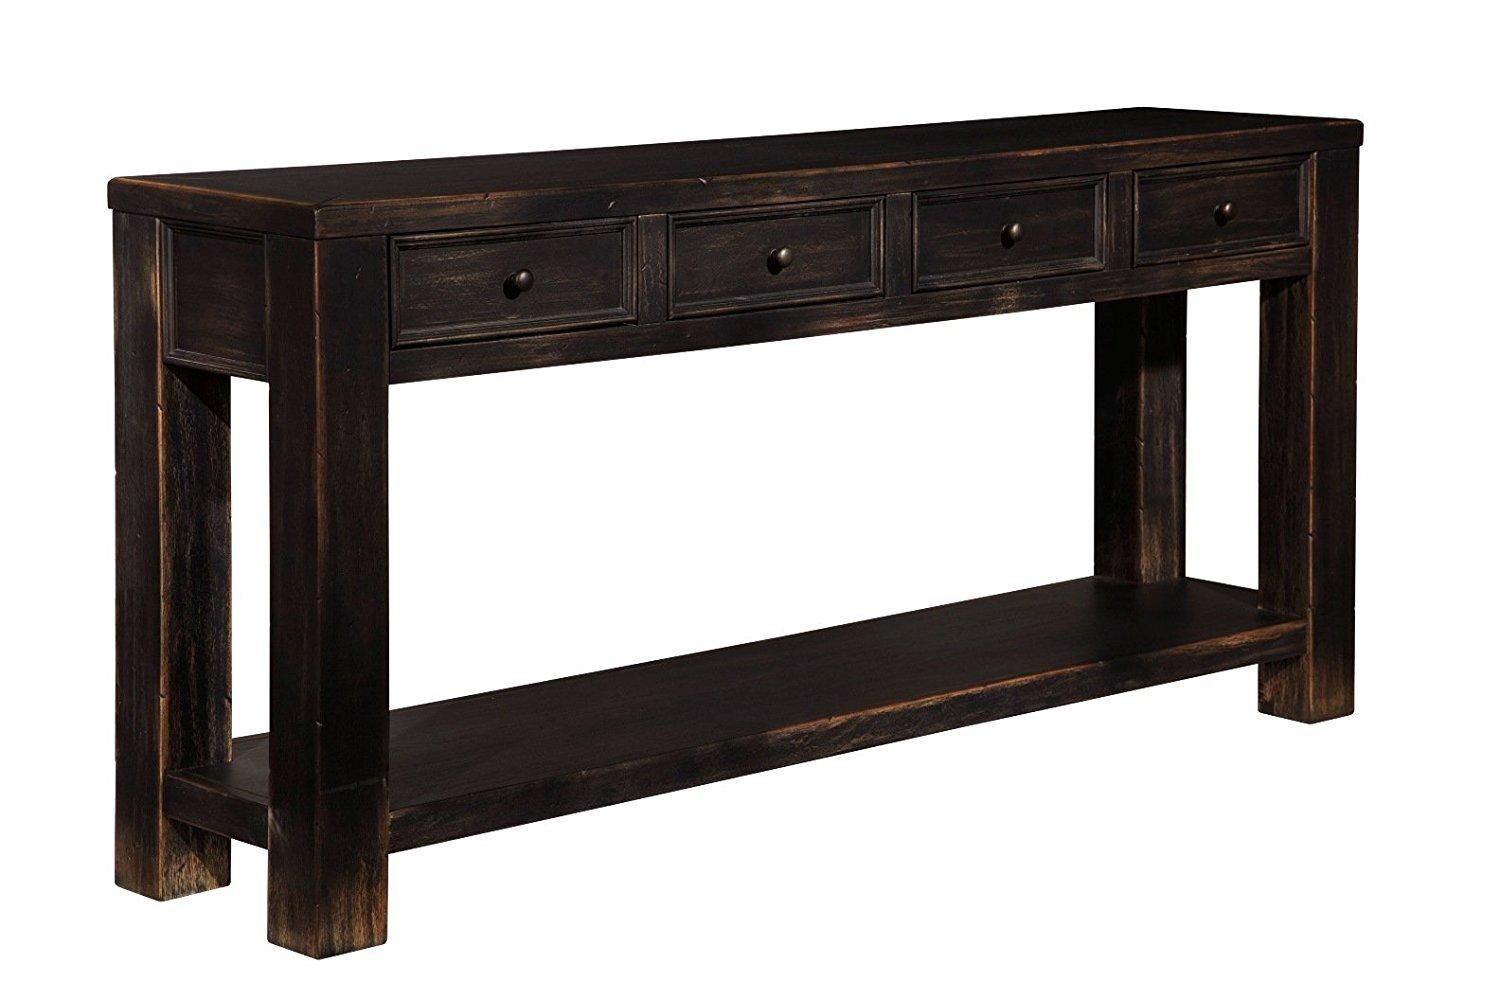 Sofas Center : Addison Reclaimed Wood And Metal Sofa Table Drawers Regarding Sofa Table Drawers (View 7 of 20)